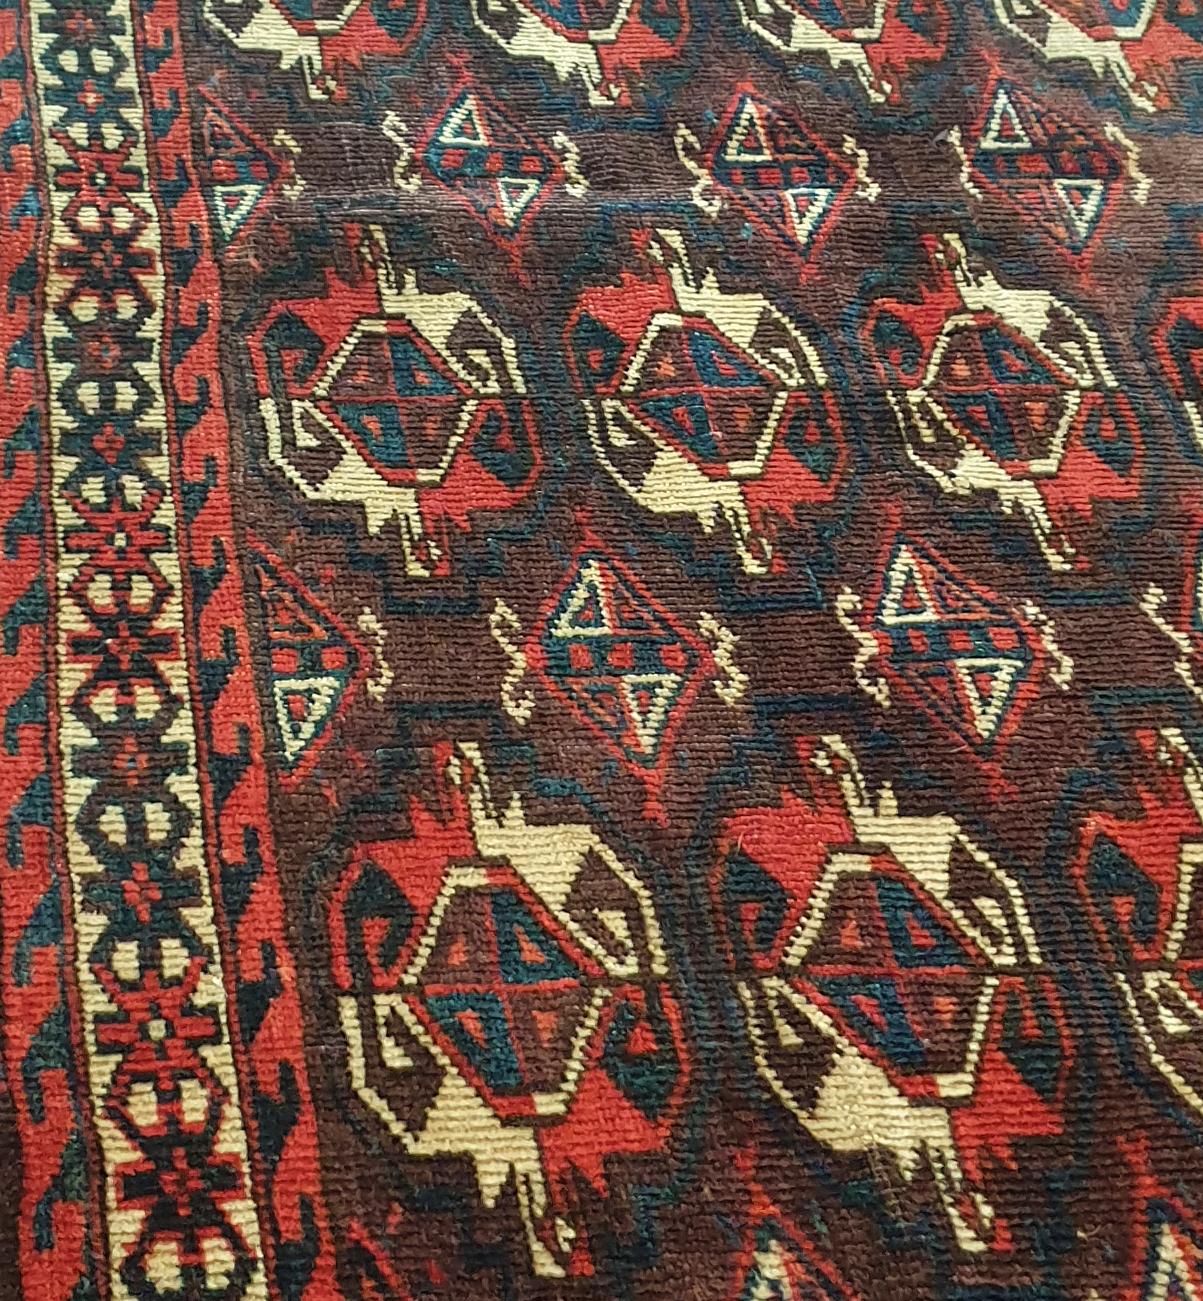 912 - Beautiful Turkmen from the end of the 19th century for horse or Chuval cover, with a nice Bukhara design and natural red field colors, finely hand-knotted with woolen velvet on a wool foundation.